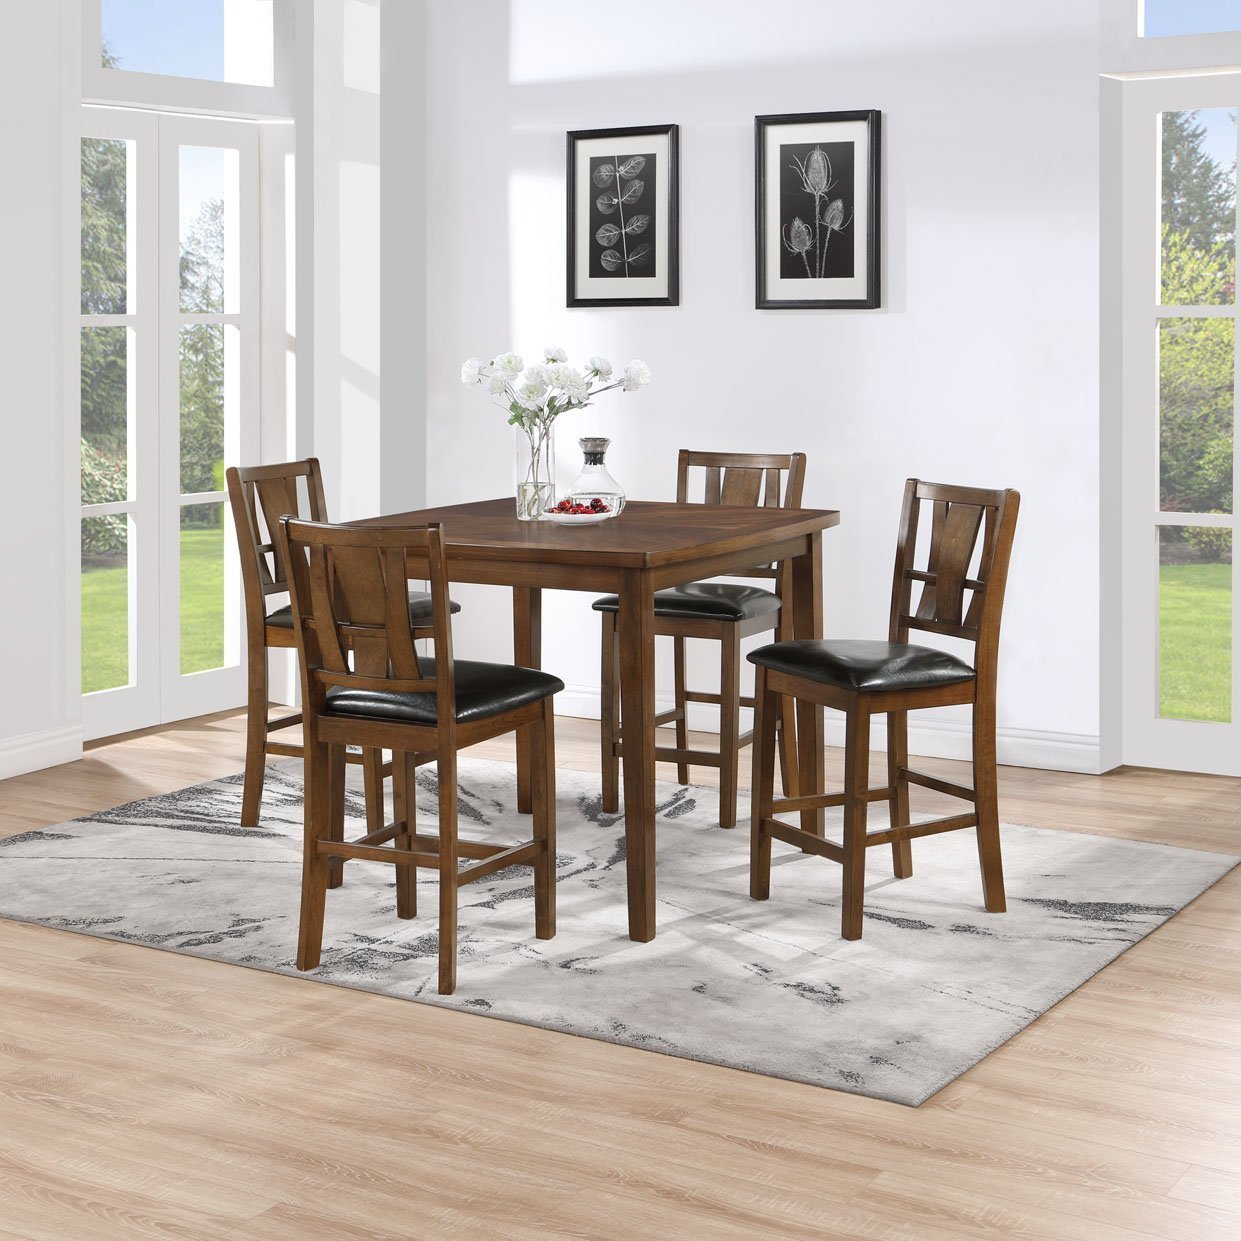 5-piece Counter Height Dining Set, Brown Cherry - Tuesday Morning-Dining Sets